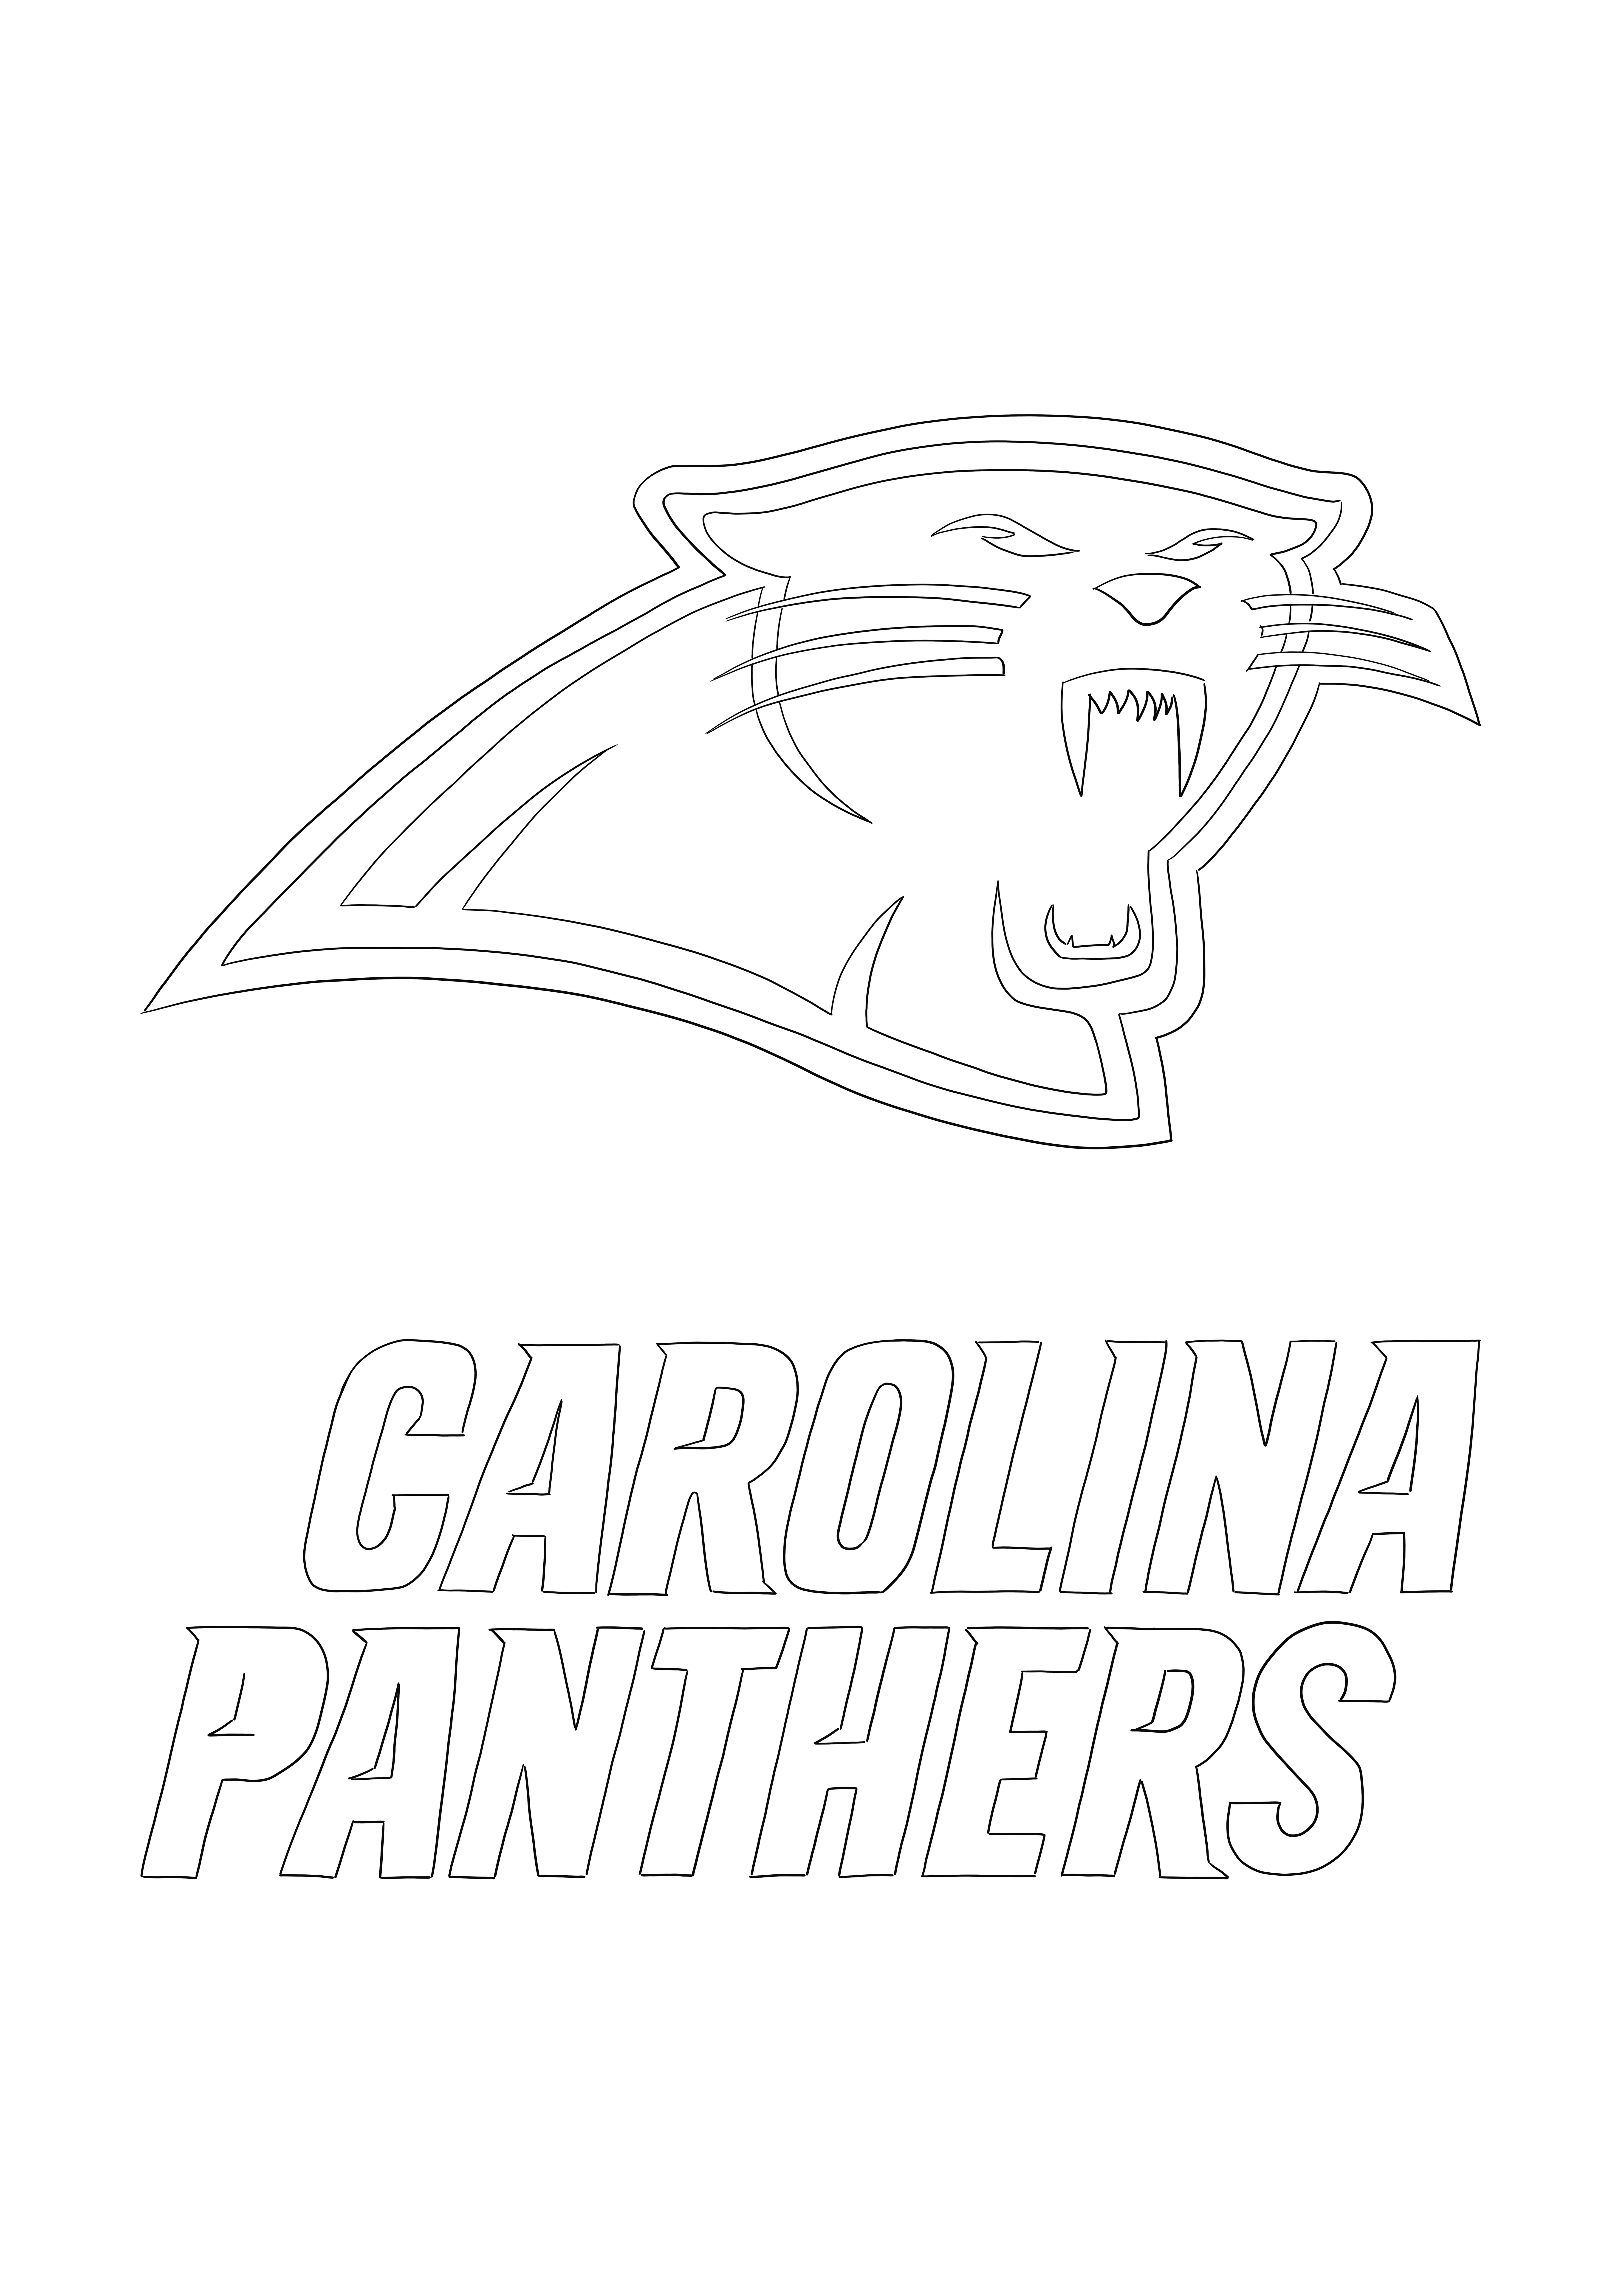 Carolina Panthers Logo free printable to color for all who love NFL